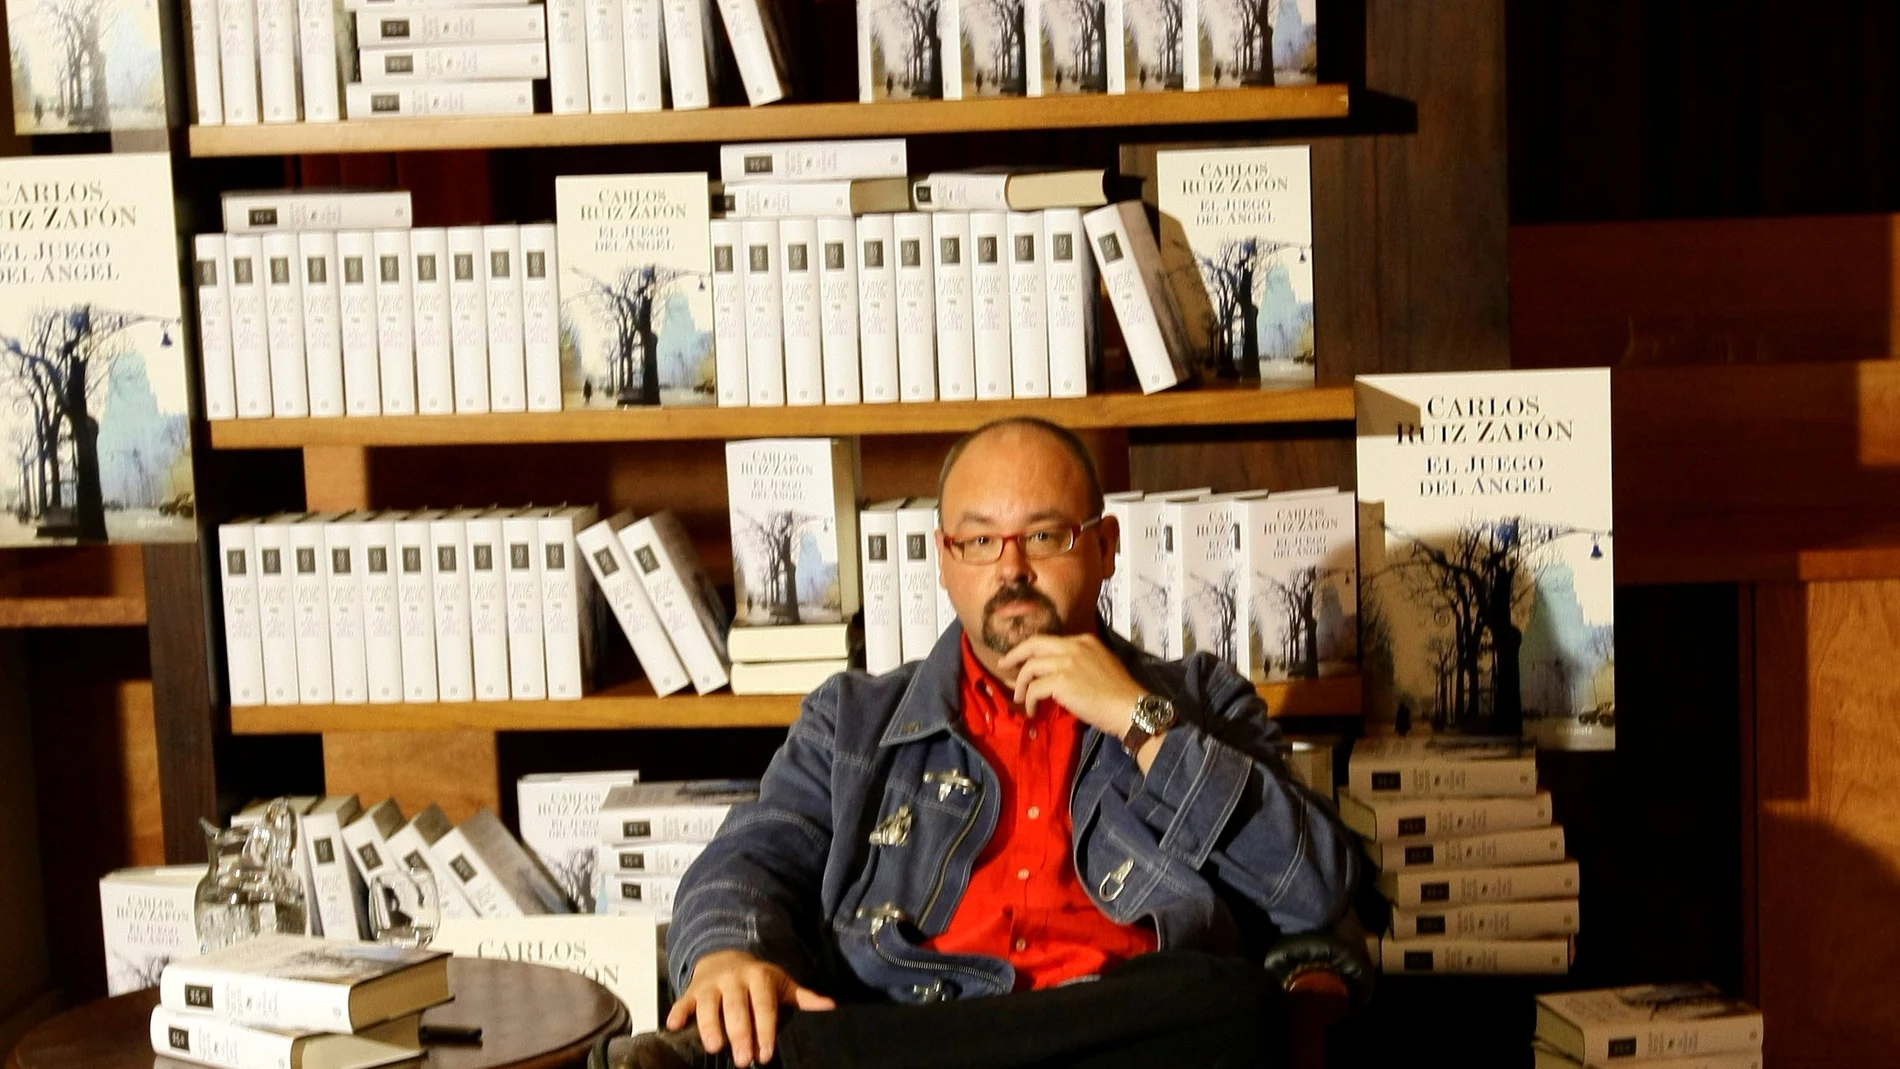 FILE PHOTO: Spanish writer Carlos Ruiz Zafon attends a photo call before the presentation on his new book titled "El juego del Angel", or The game of the Angel, at the Liceu theater